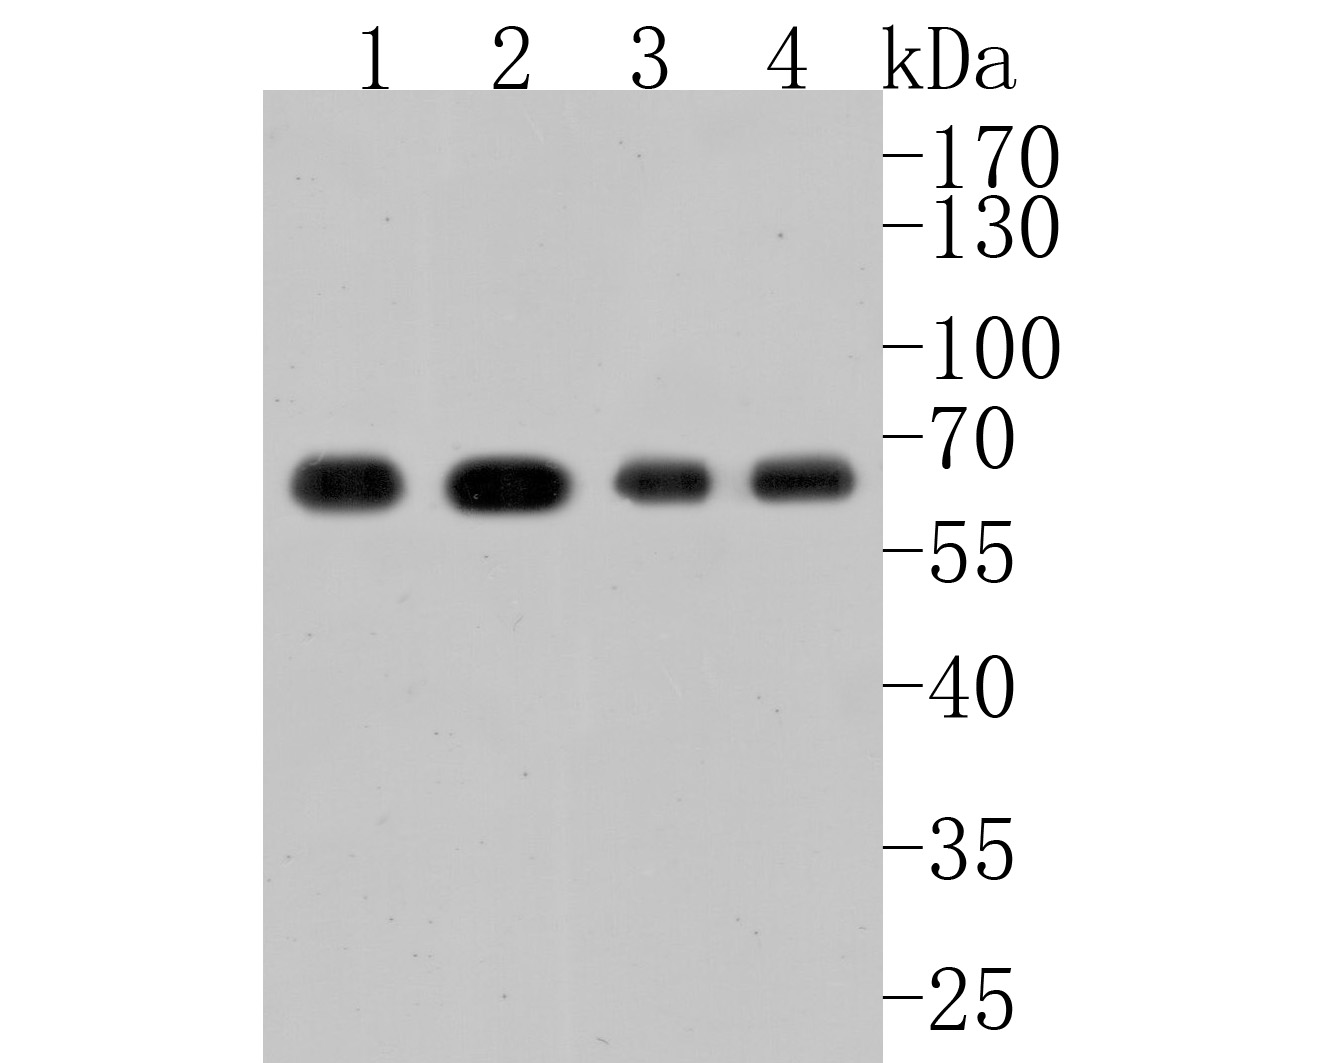 Western blot analysis of ATG14L on different lysates. Proteins were transferred to a PVDF membrane and blocked with 5% BSA in PBS for 1 hour at room temperature. The primary antibody (HA500096, 1/1,000) was used in 5% BSA at room temperature for 2 hours. Goat Anti-Rabbit IgG - HRP Secondary Antibody (HA1001) at 1:200,000 dilution was used for 1 hour at room temperature.<br />
Positive control: <br />
Lane 1: Hela cell lysate<br />
Lane 2: MCF-7 cell lysate<br />
Lane 3: HepG2 cell lysate<br />
Lane 4: SiHa cell lysate